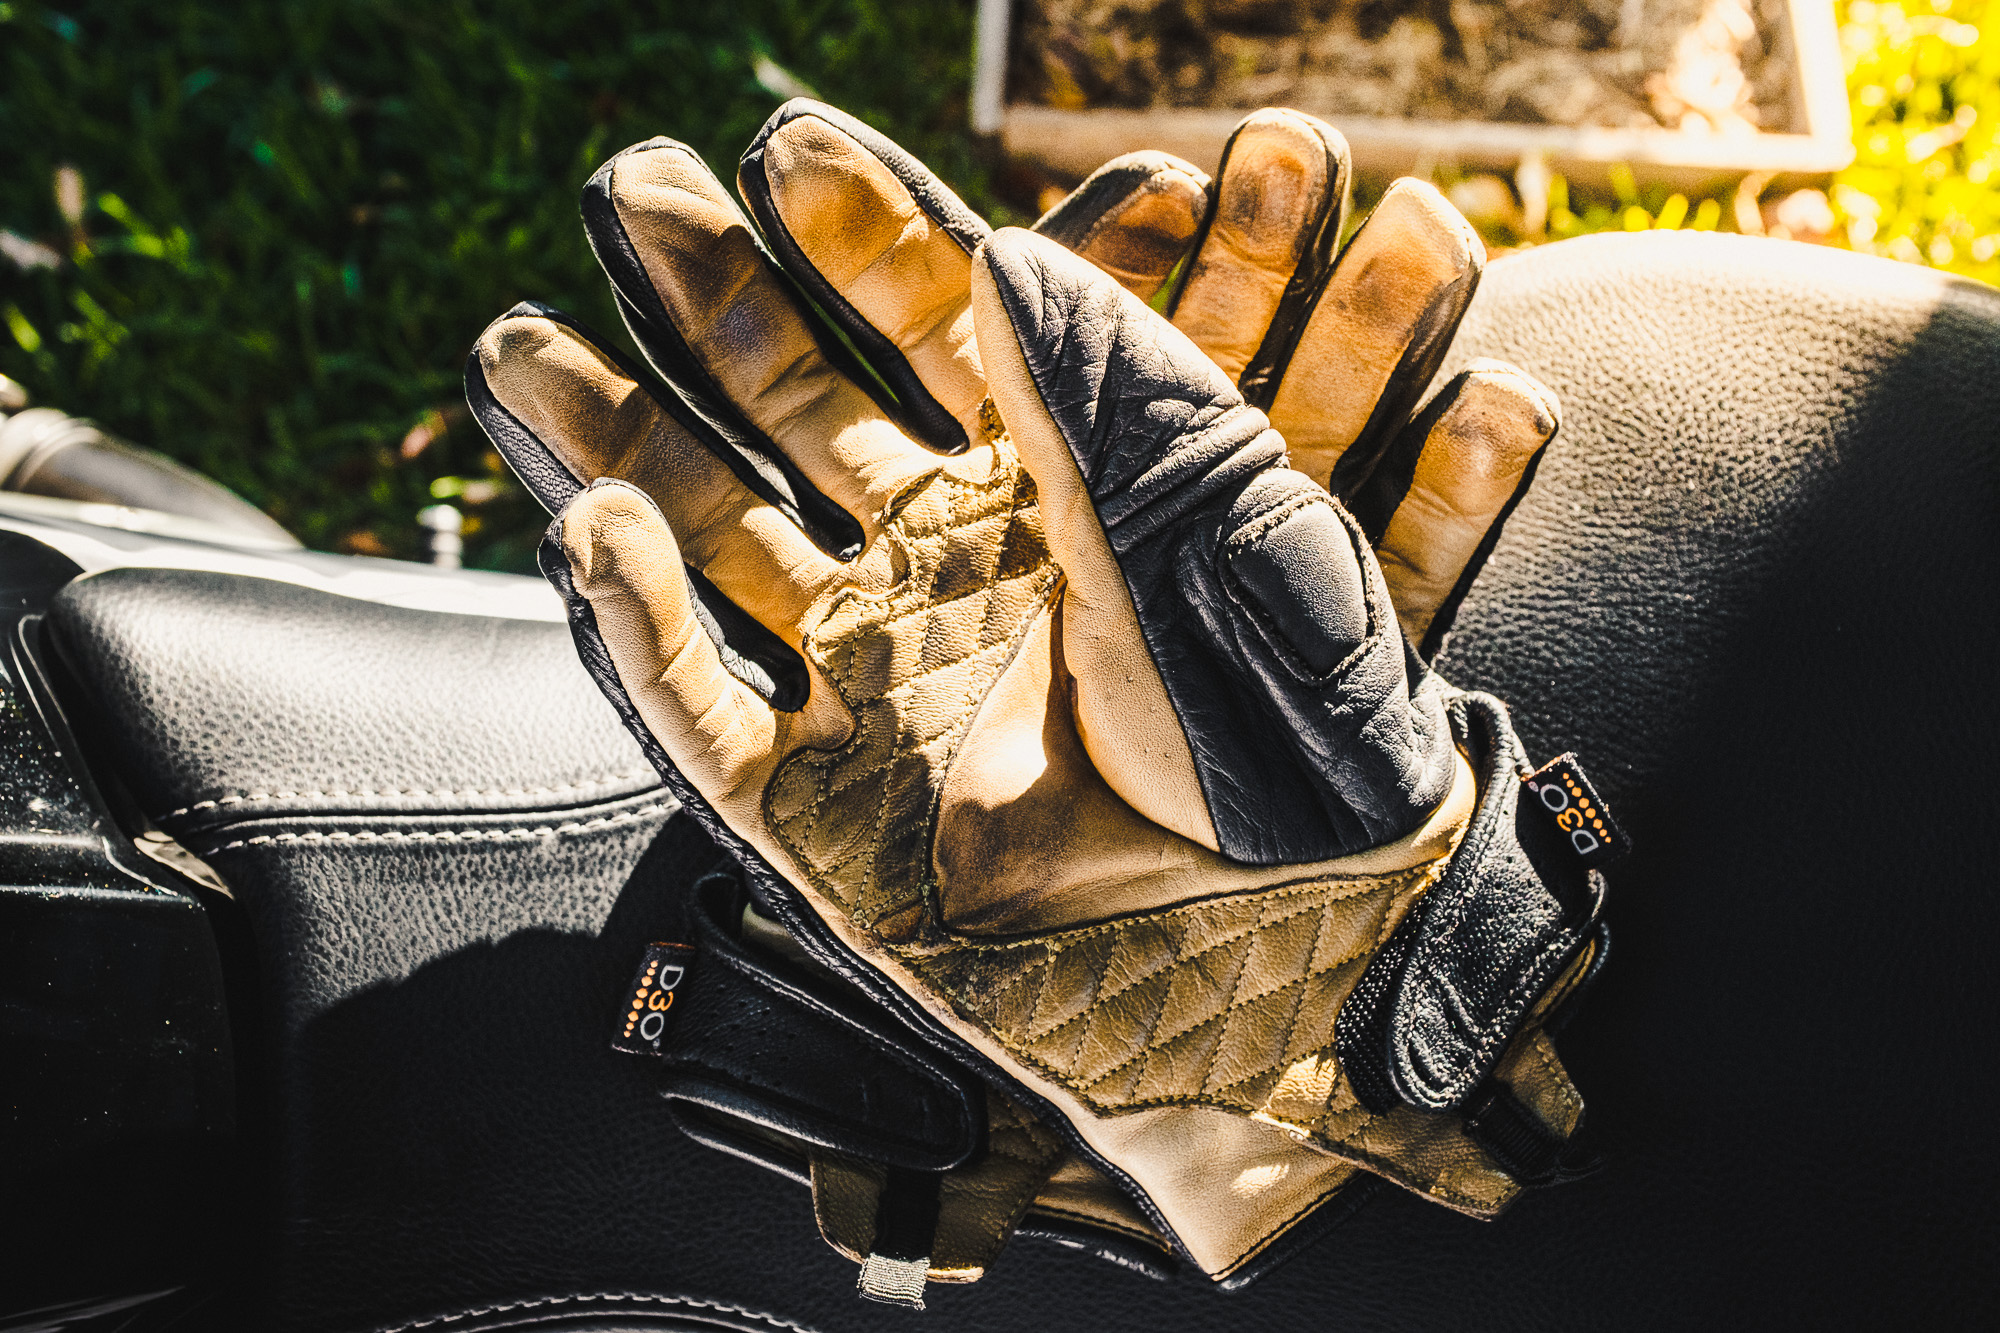 Icon 1000 Axys Gloves